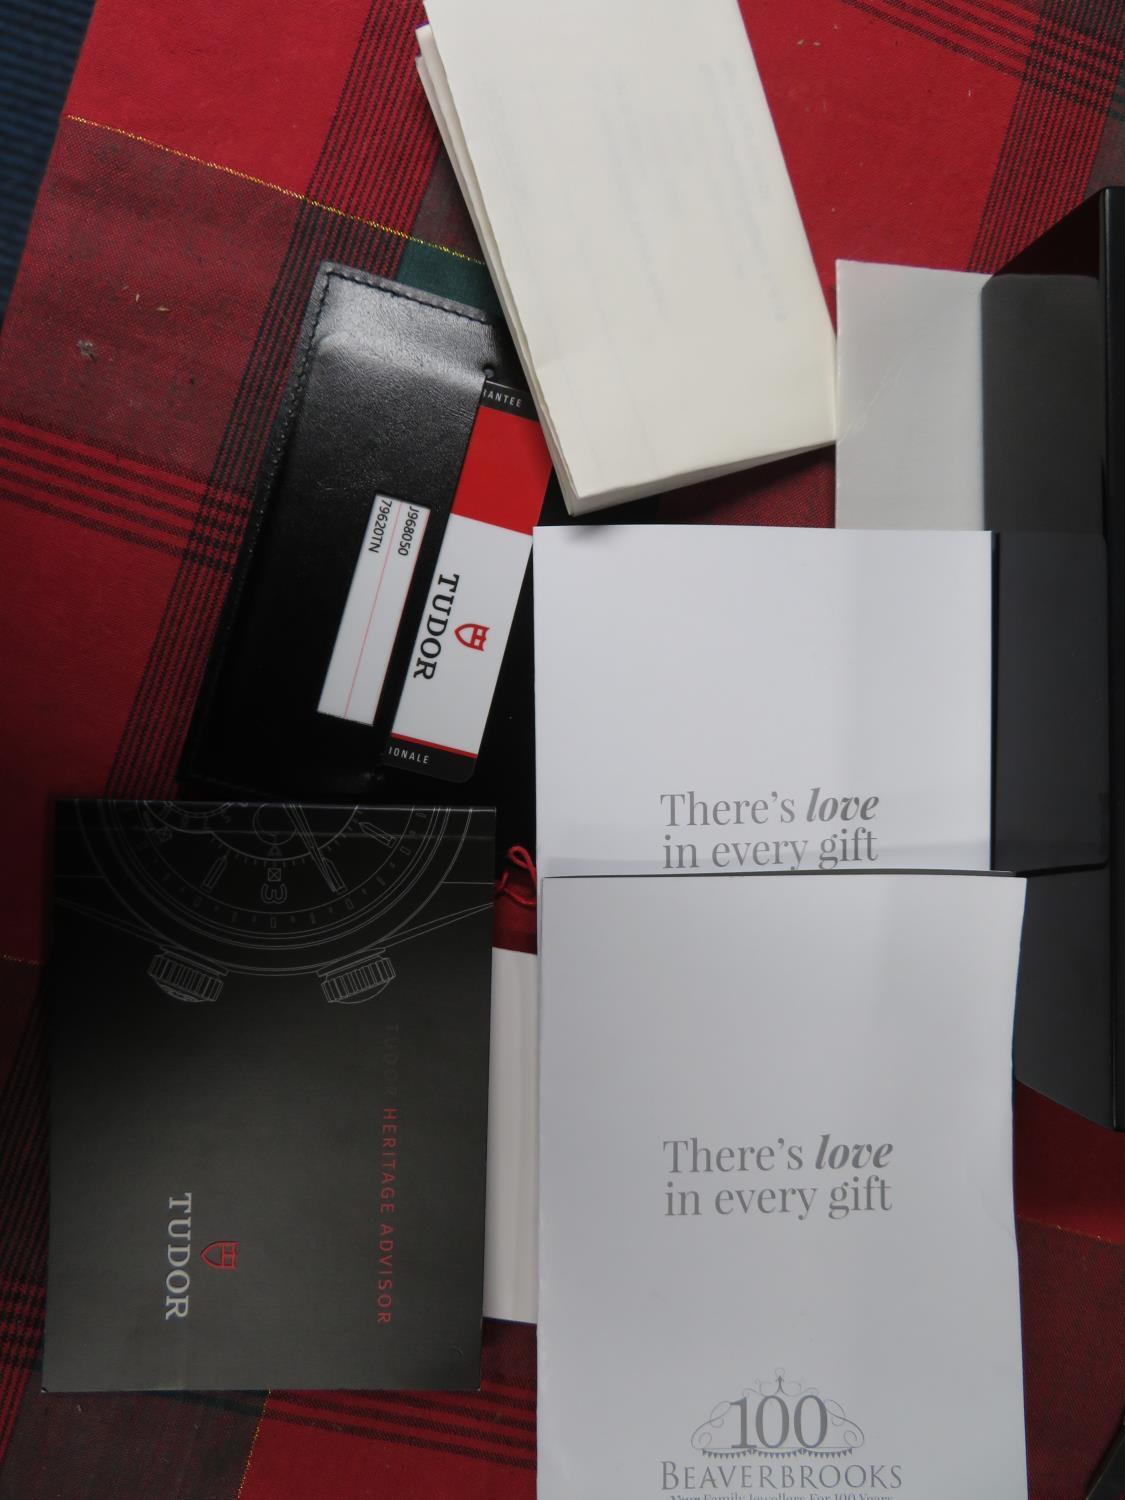 Tudor Advisor Mens Watch with full paperwork and box - Image 4 of 4